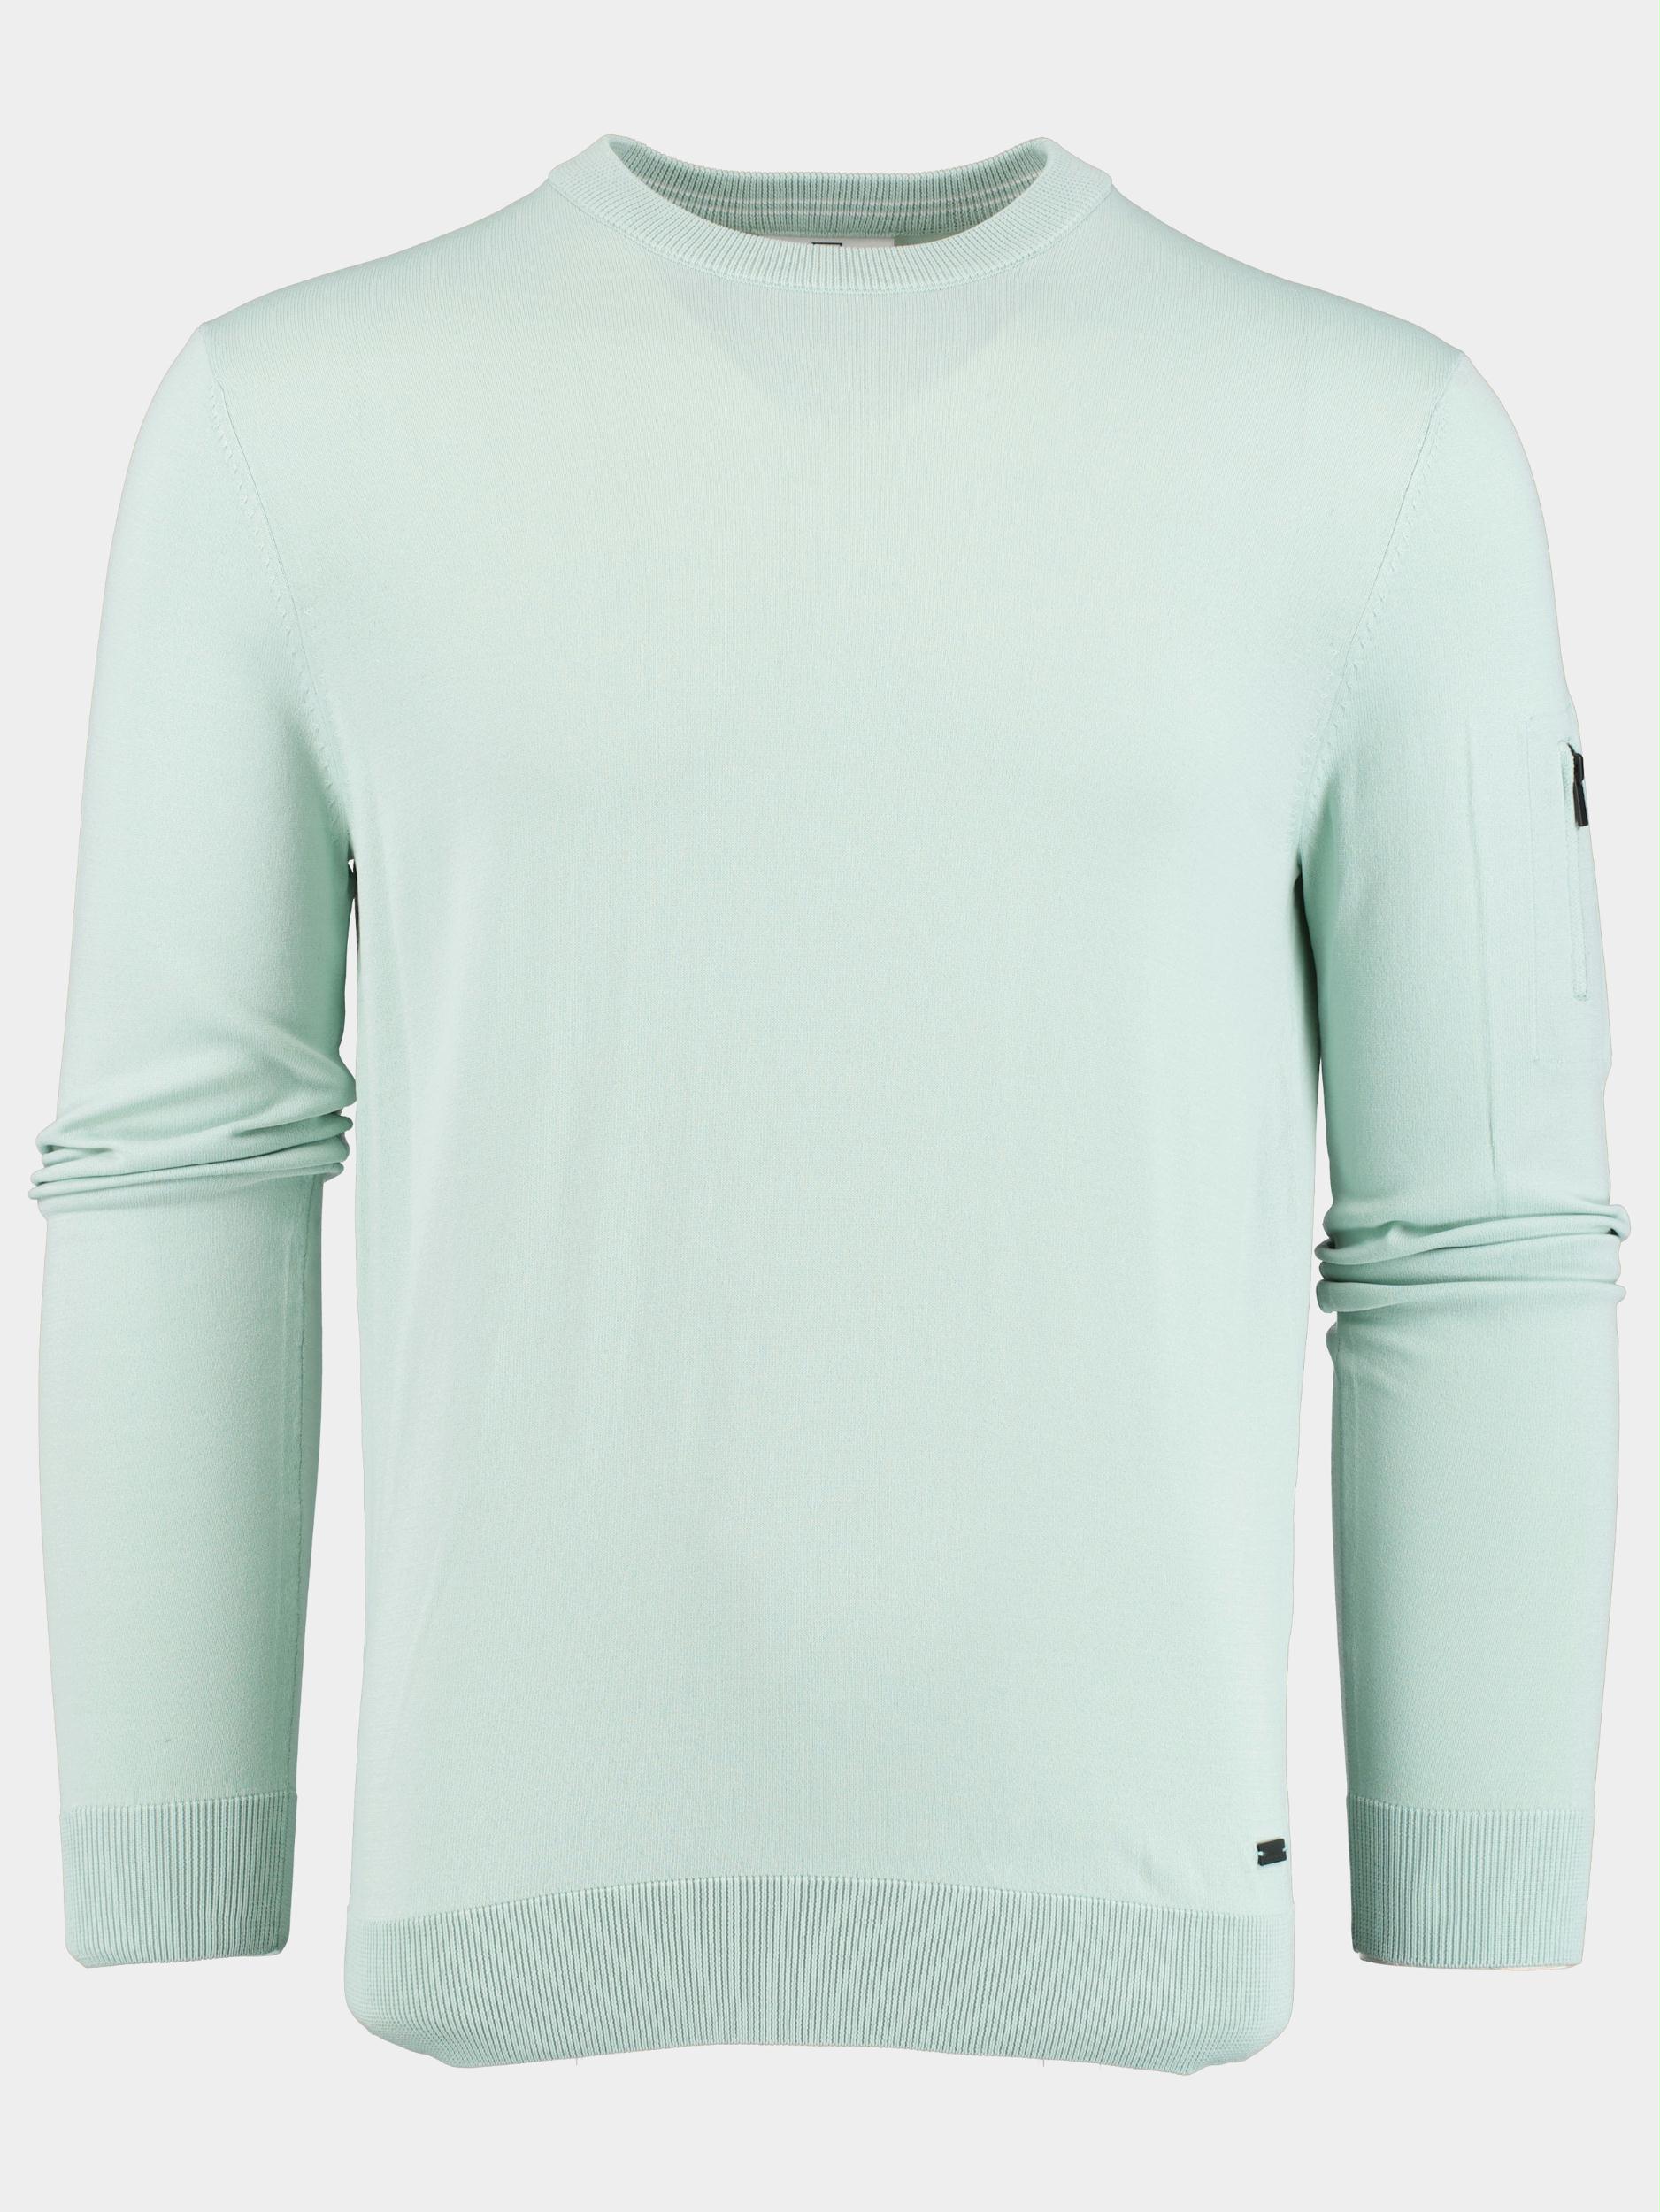 Born With Appetite Pullover Groen Pipa R-neck Stretch 23105PI72/315 ocean